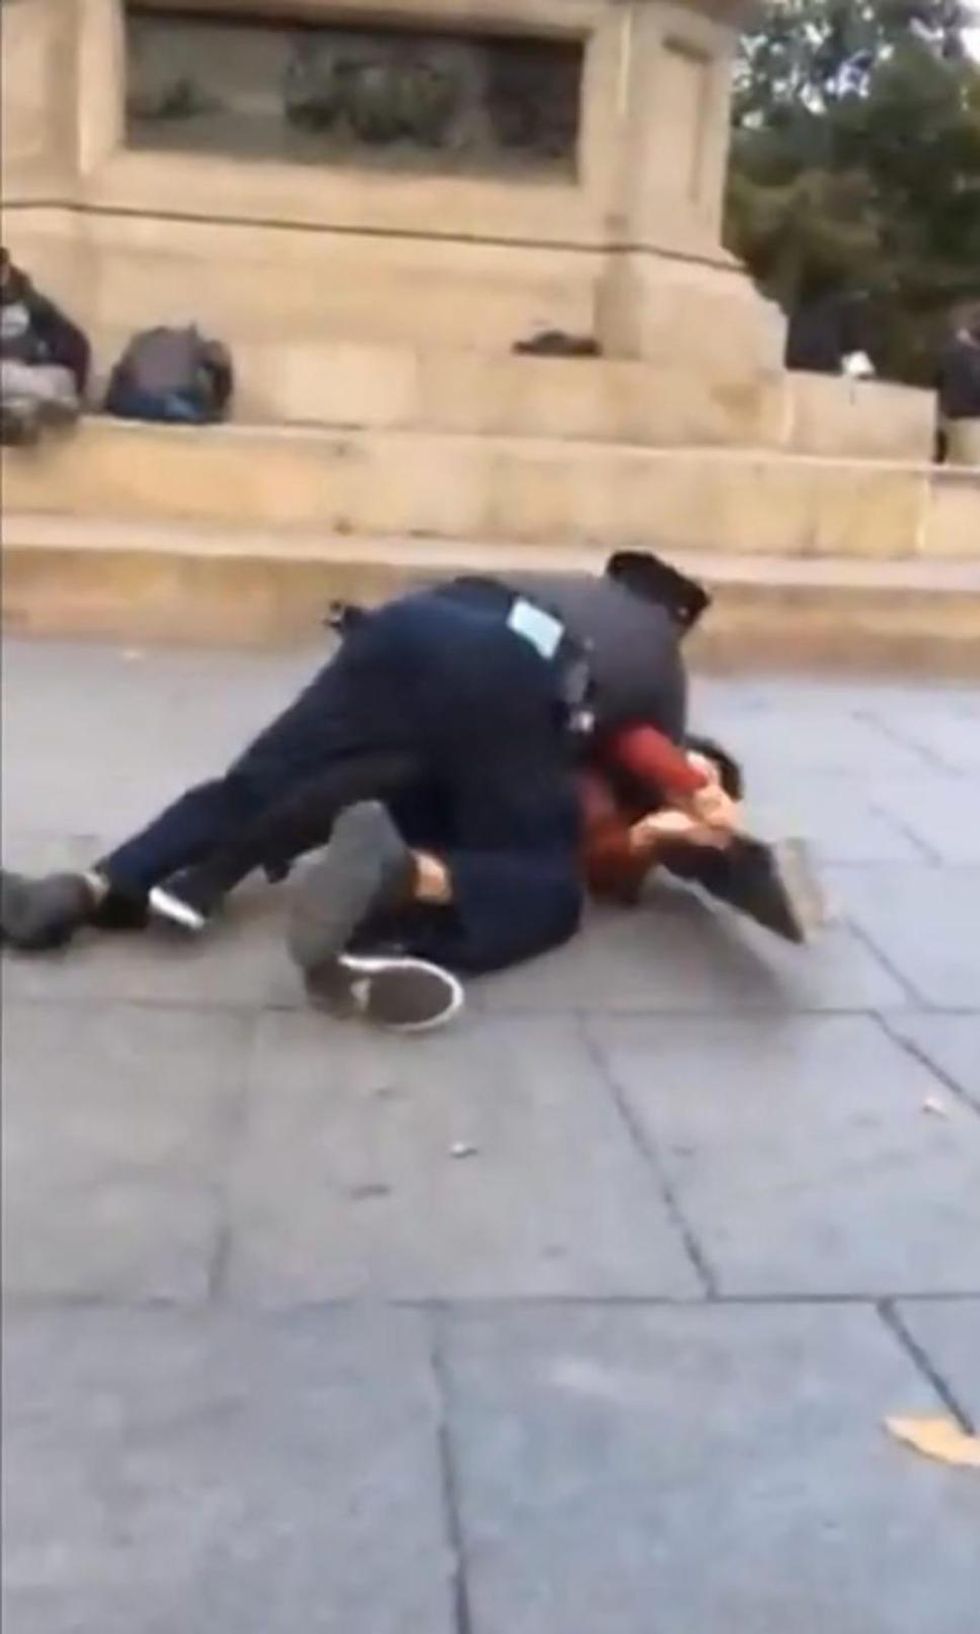 Officer Accused of Using Illegal Maneuver During Confrontation With Skater After Witness Video Surfaces